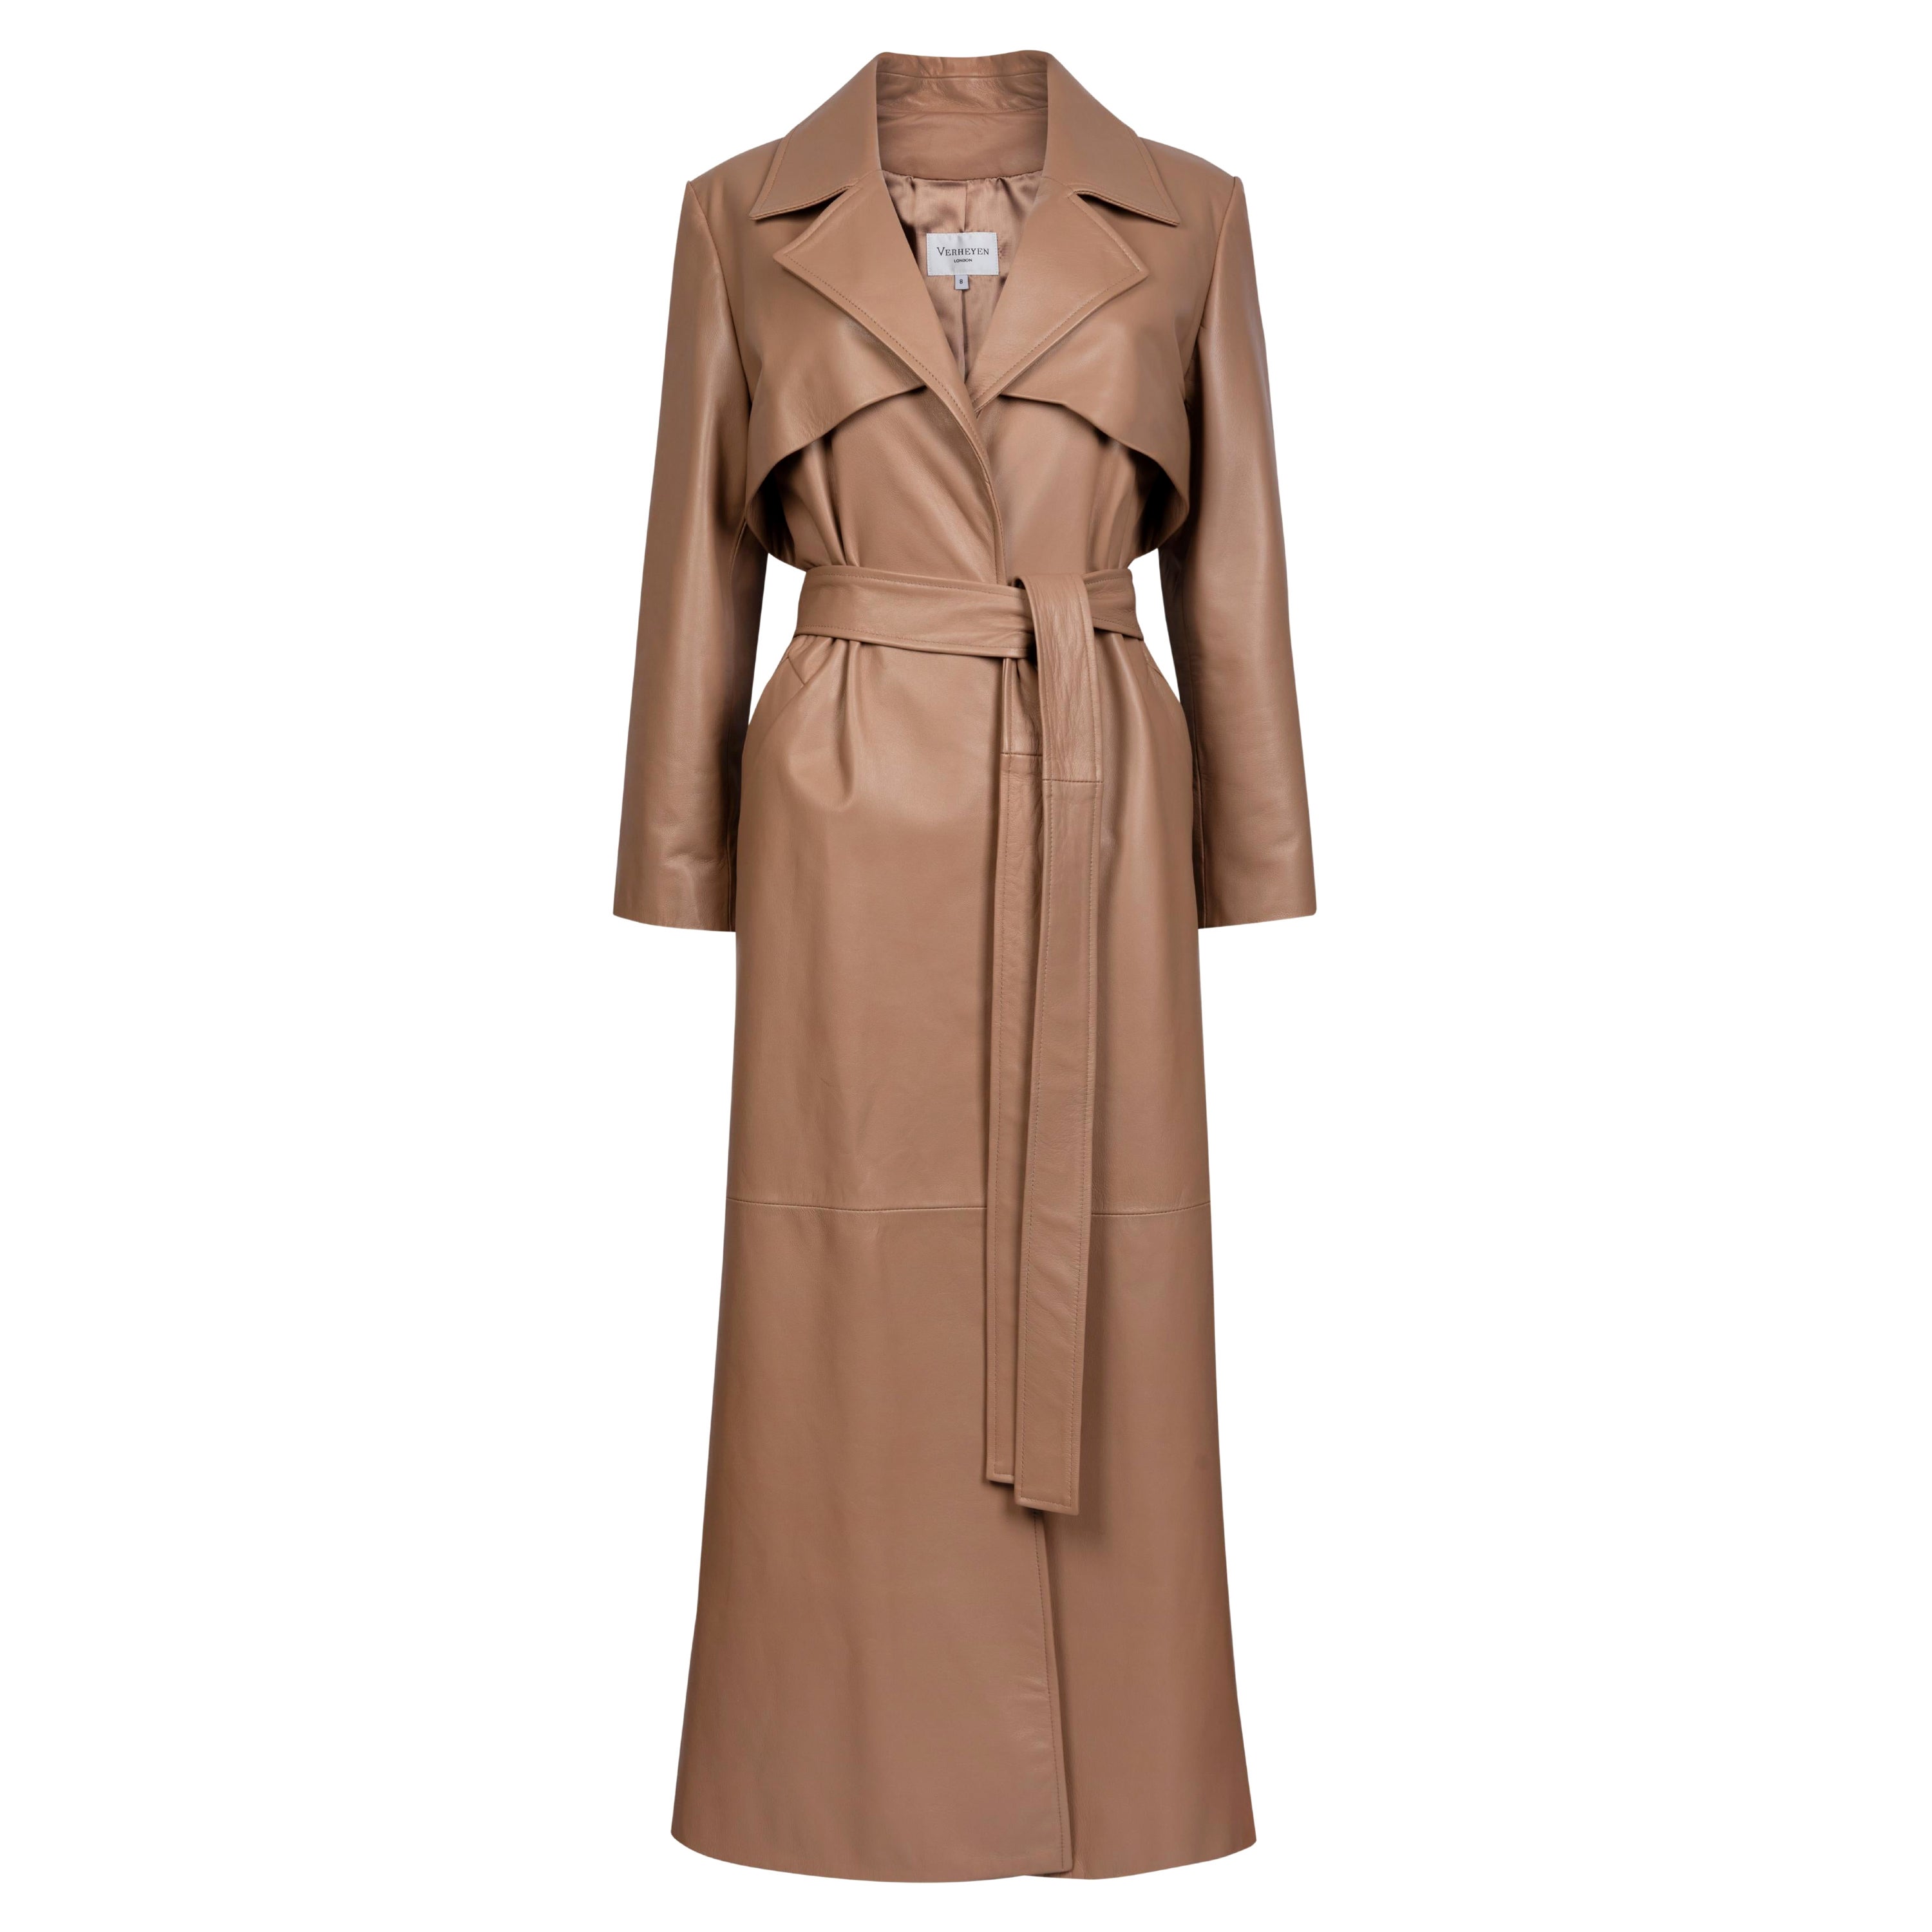 Verheyen London Leather Trench Coat in Taupe Brown - Size uk 12 For Sale